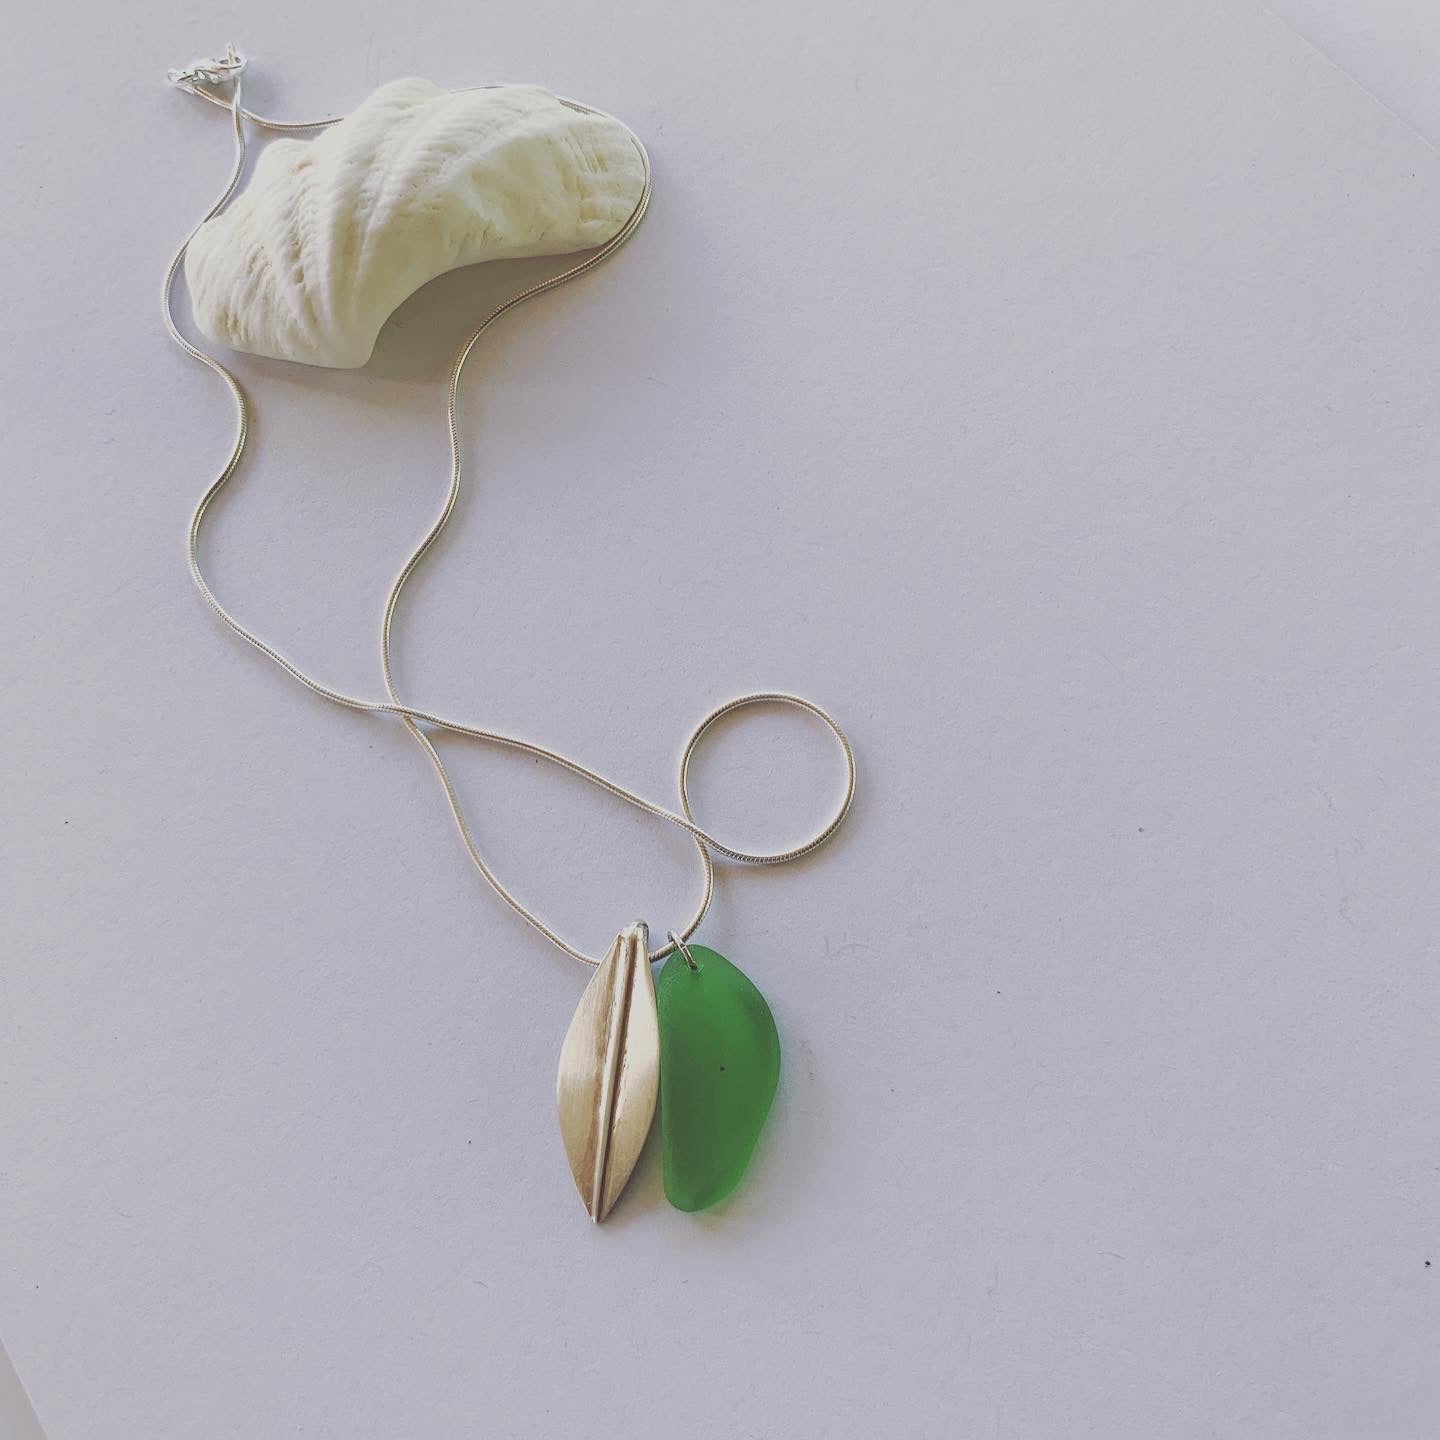 Silver leaf and beach glass pendant. Naturally ocean tumbled beach glass and silver leaf pendant on sterling silver snake chain..... available in 45cm and 50cm sterling silver snake chain.  Ocean and Earth🌊🍃  Each piece of natural beach glass may slightly vary, as no piece of beach glass is the same. Unique and of the same quality only the most perfect shaped pieces are used to suit the design and how each piece sits. 